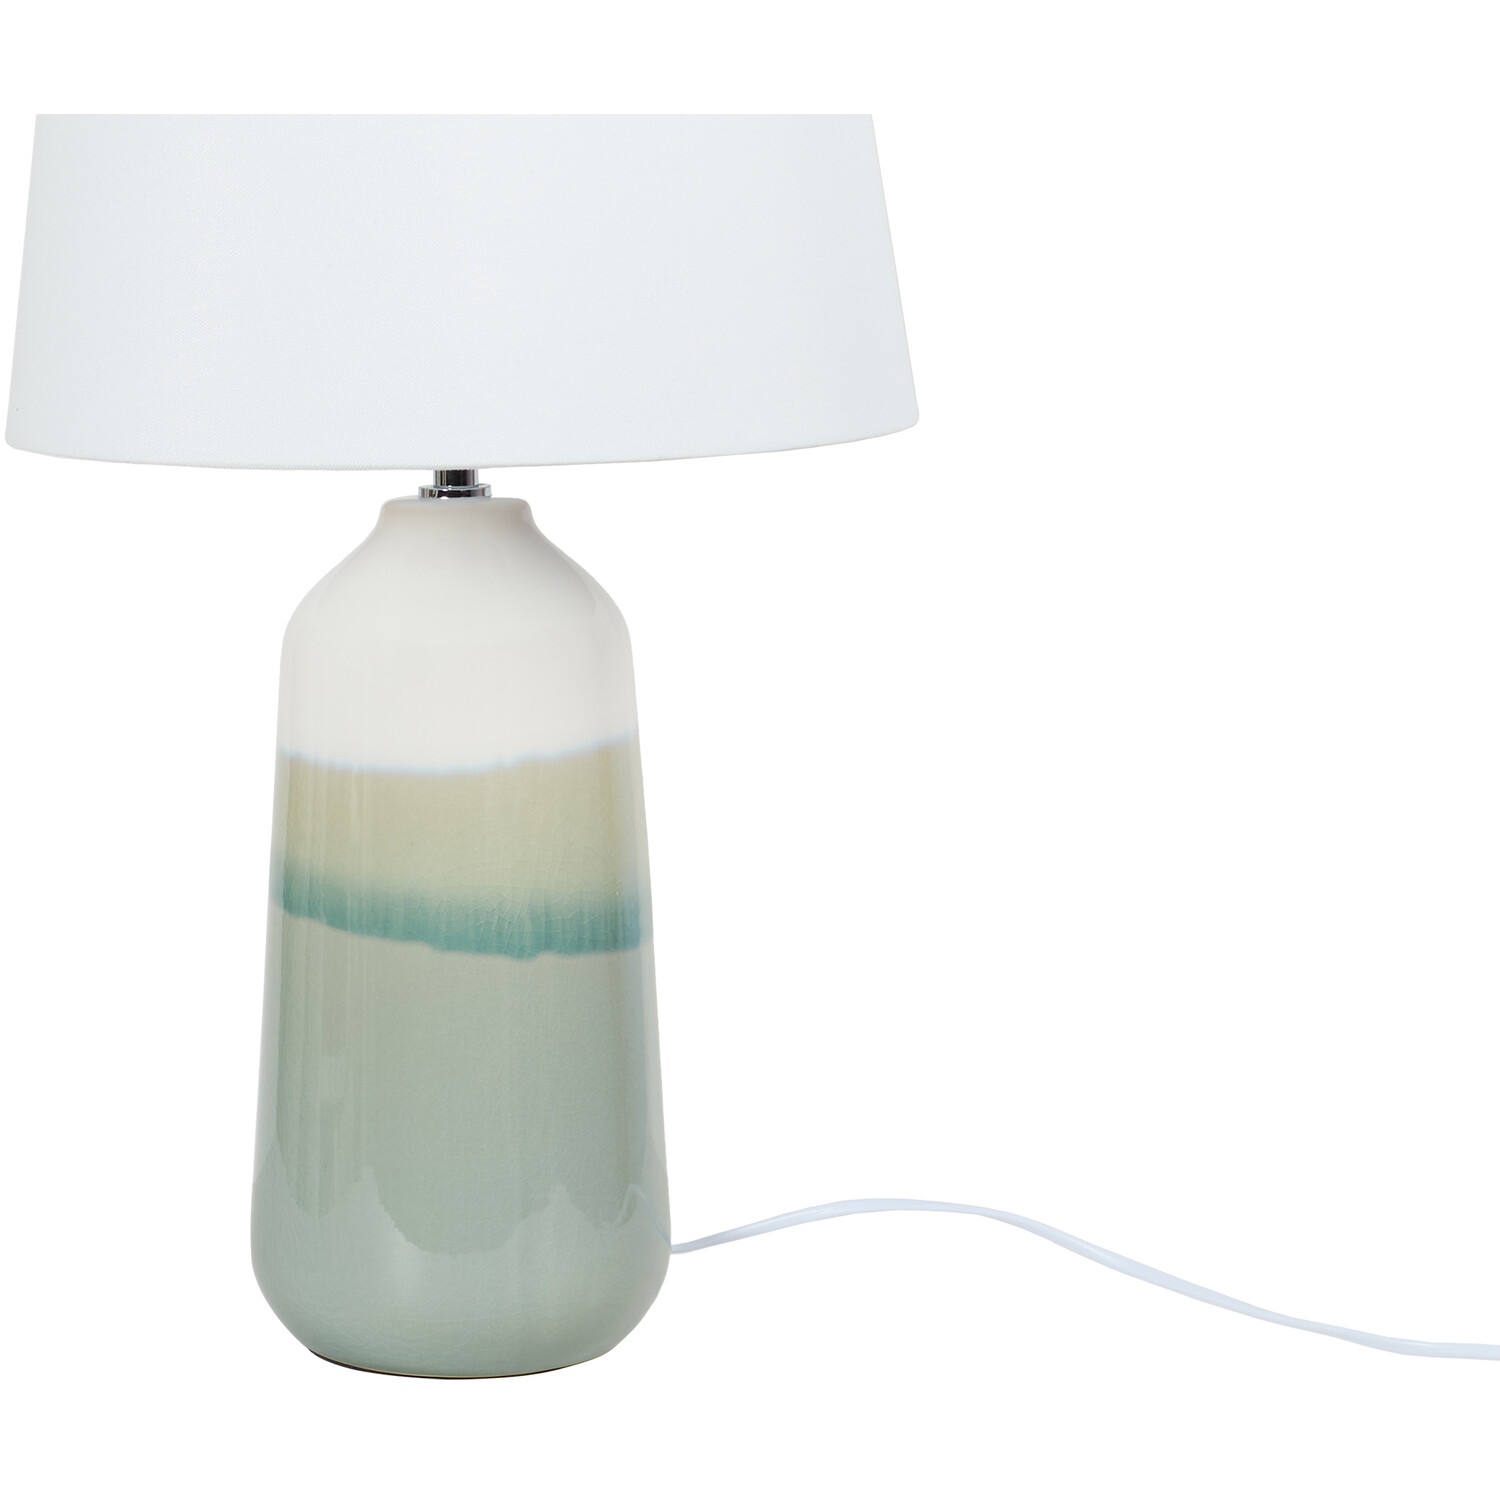 Jude Table Lamp - Blue Image 4